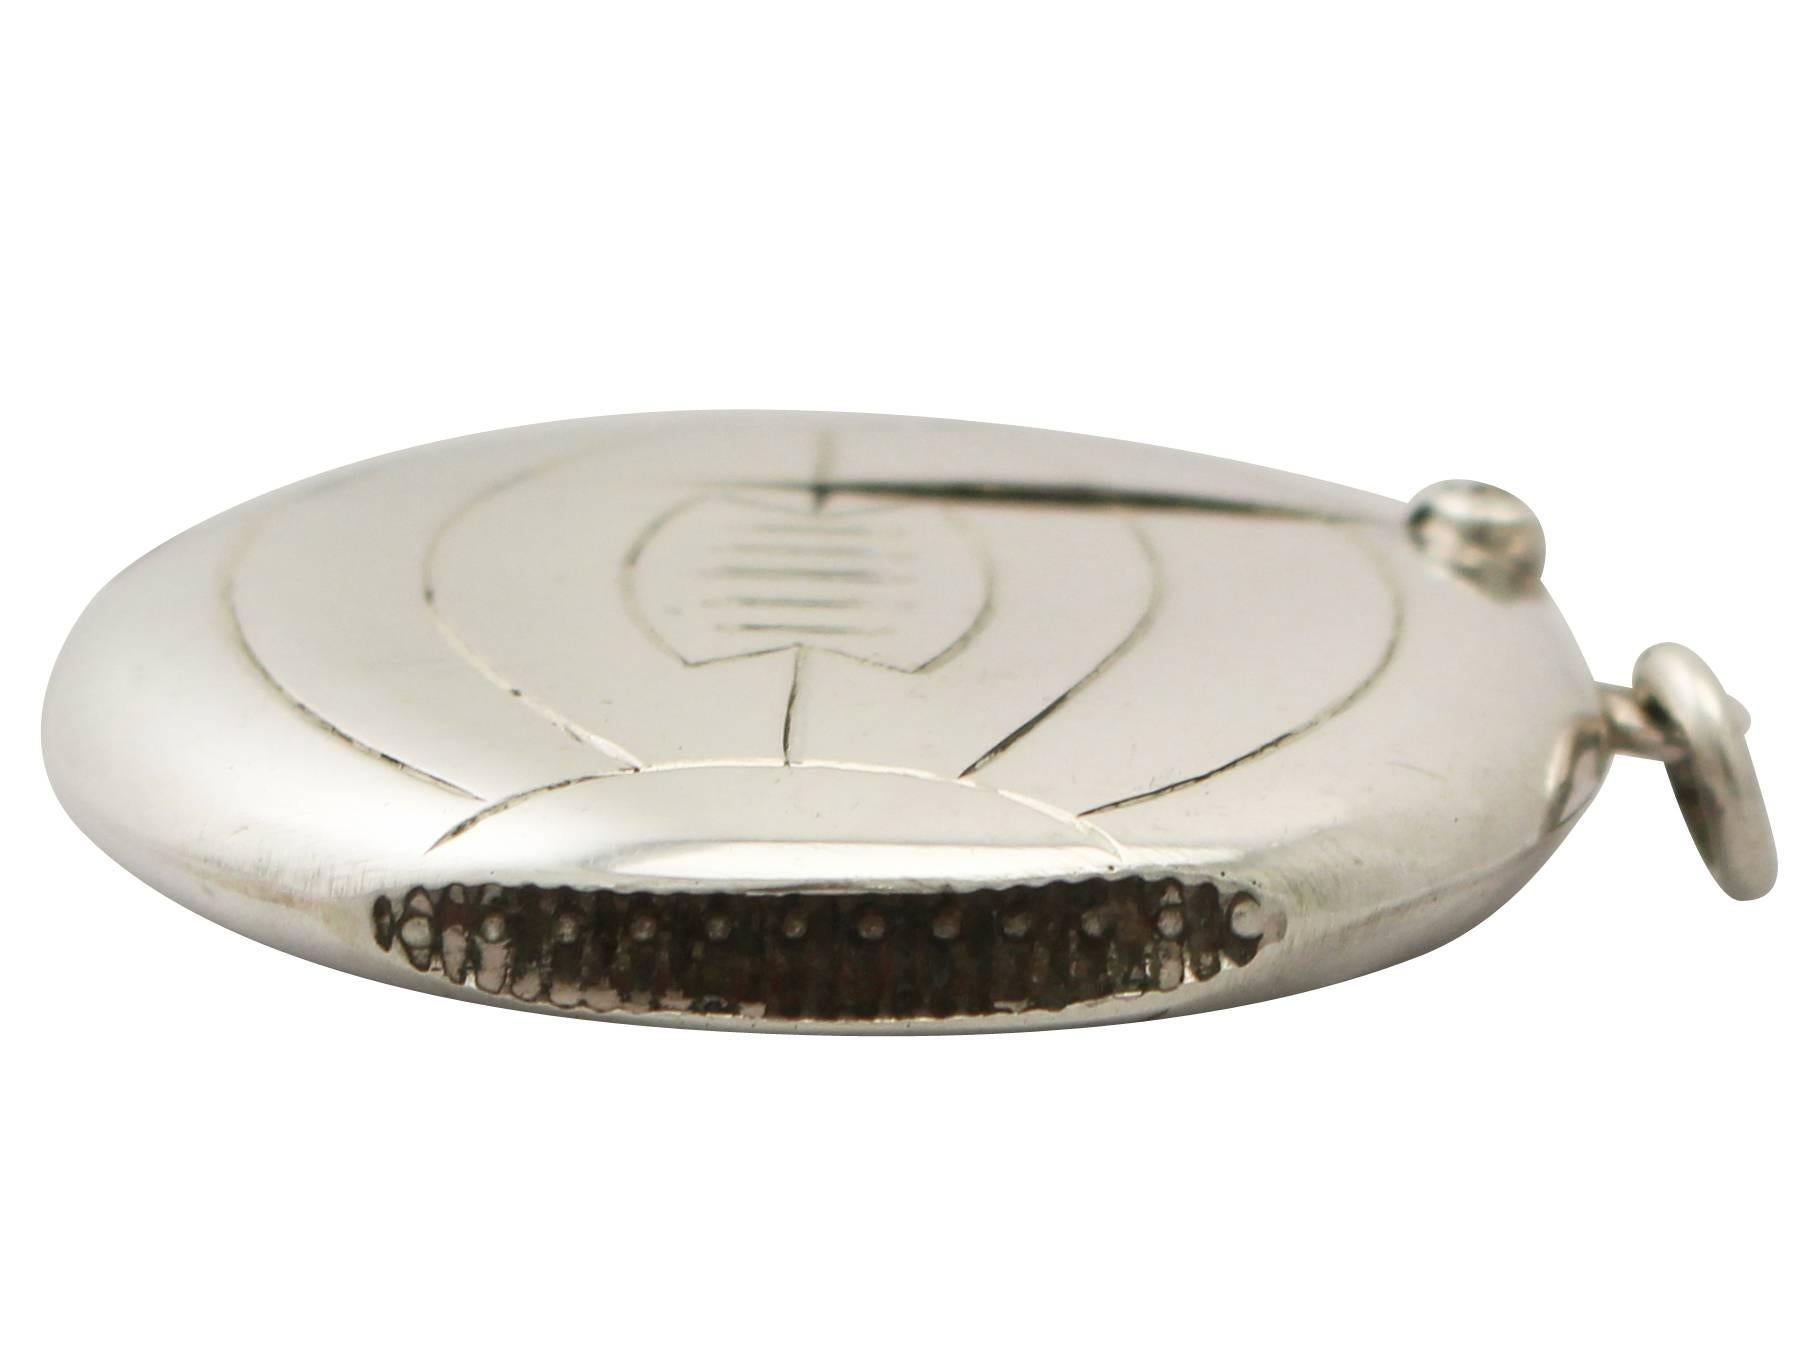 An exceptional, fine and impressive antique Edwardian English sterling silver vesta case with football interest; an addition to our sports related silverware collection

This exceptional antique Edwardian English sterling silver vesta case has